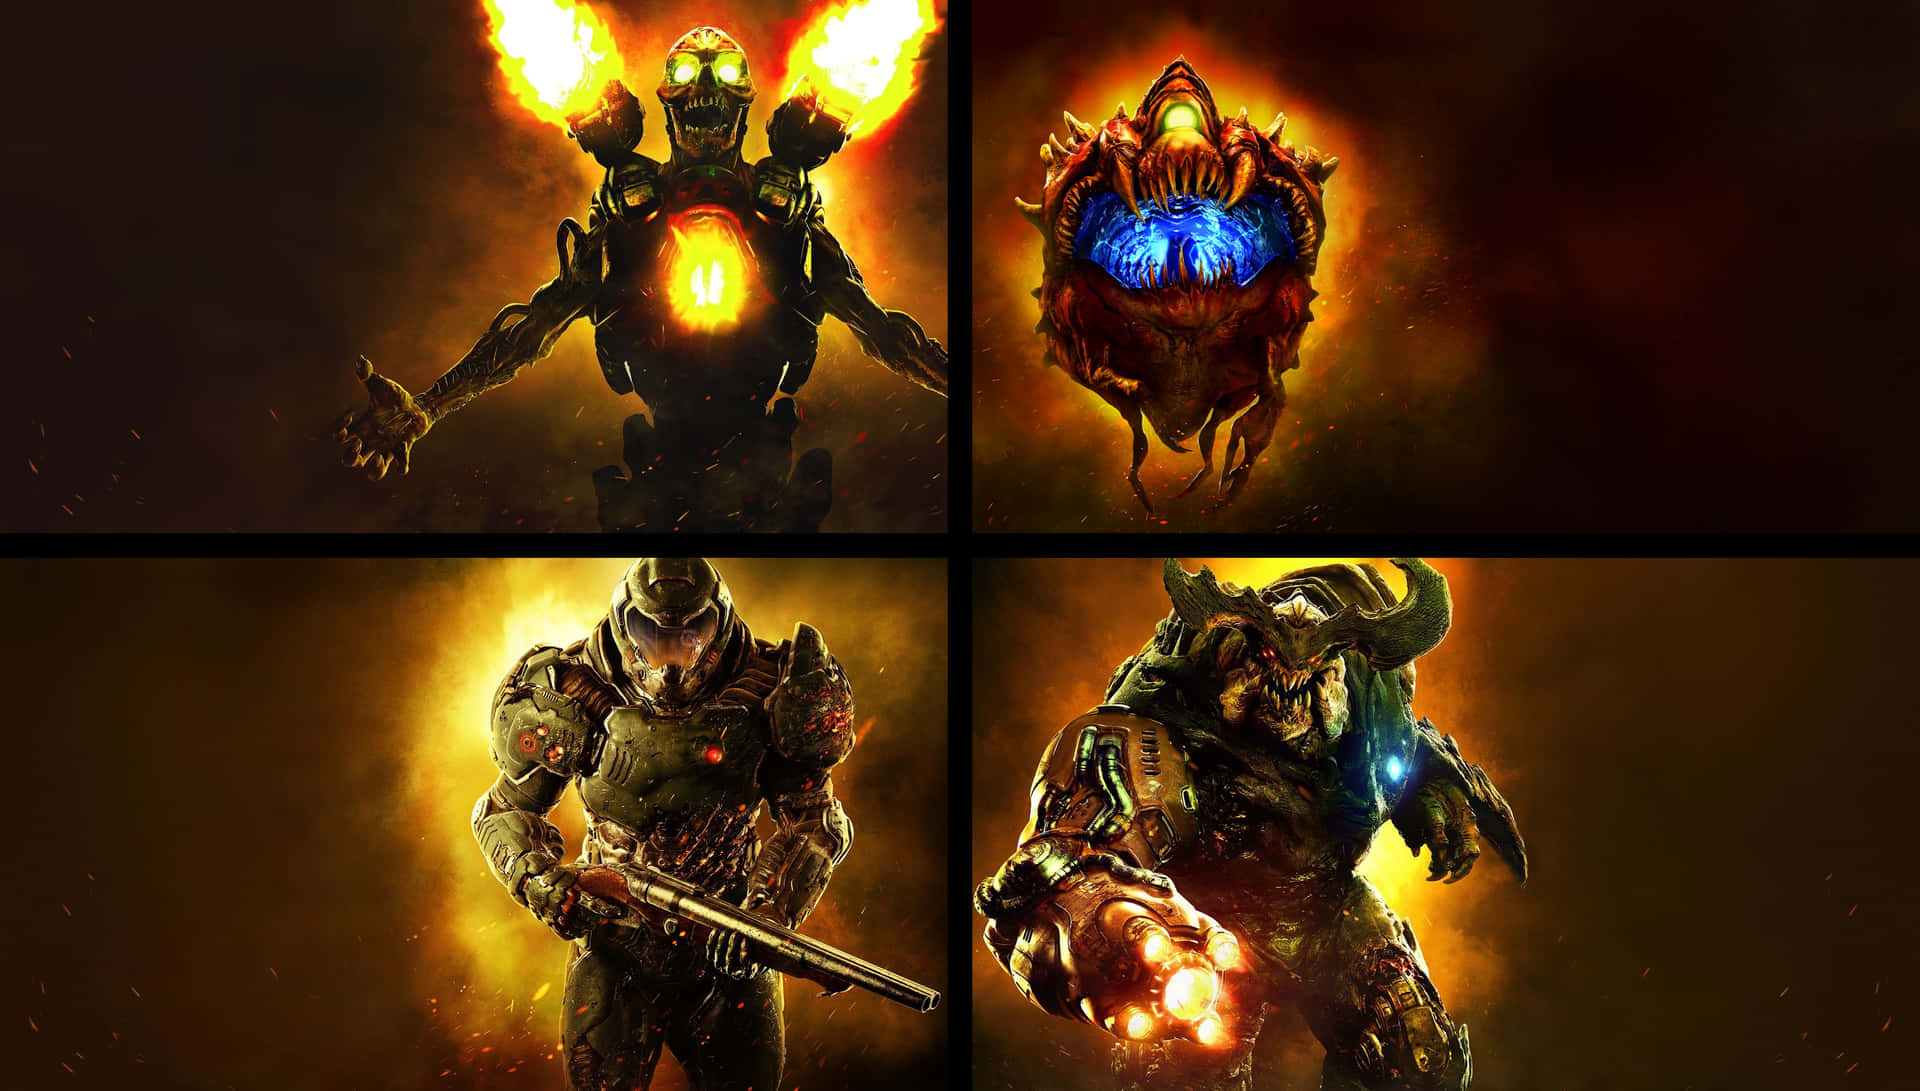 Experience the action-packed world of DOOM Wallpaper